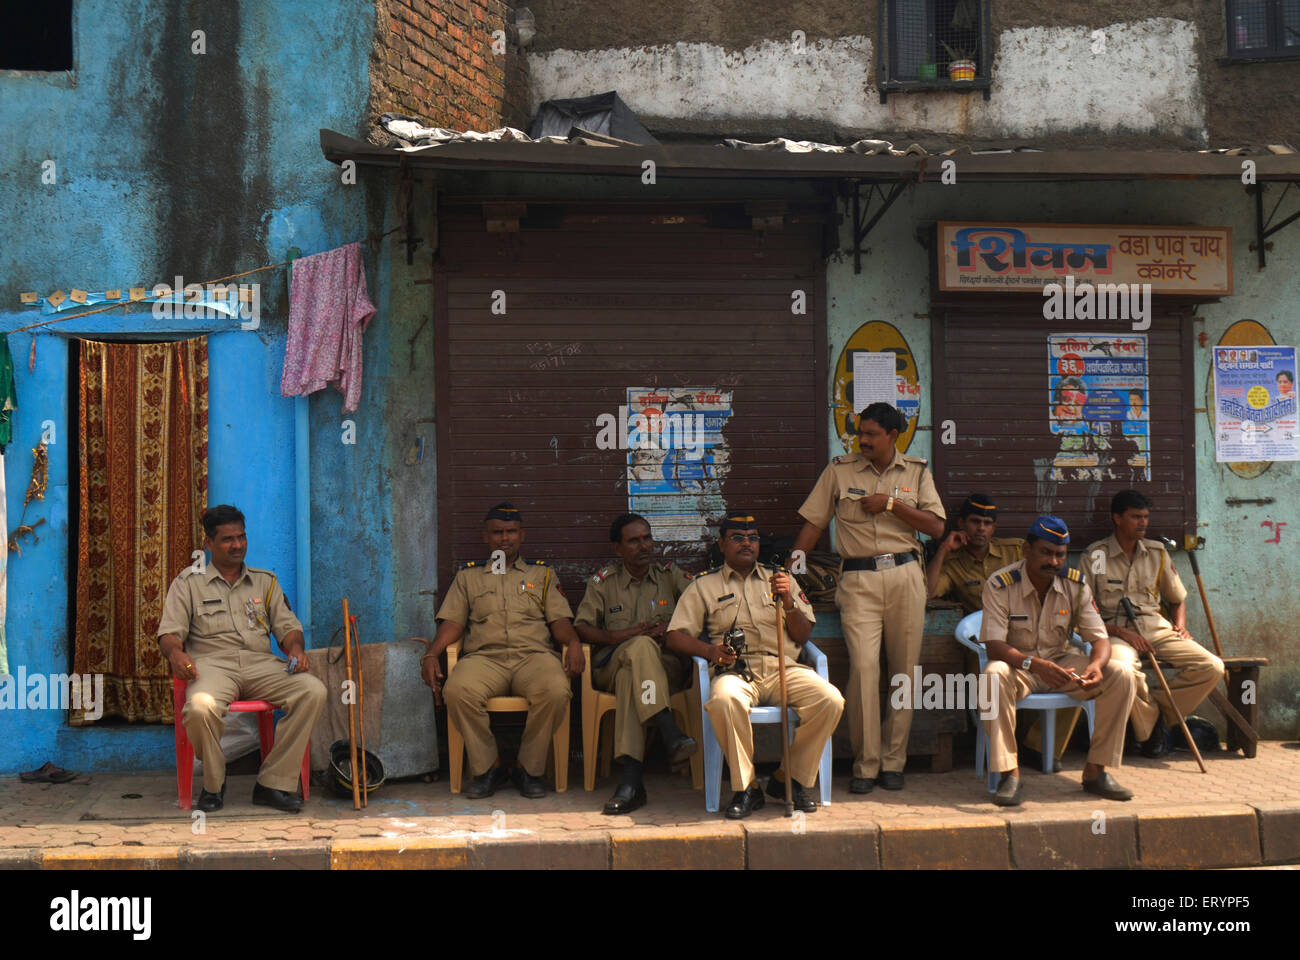 24th September 2008 ; Police personnel take guard in Dalit colony on background of verdict in massacre of Dalit family; Bombay Stock Photo